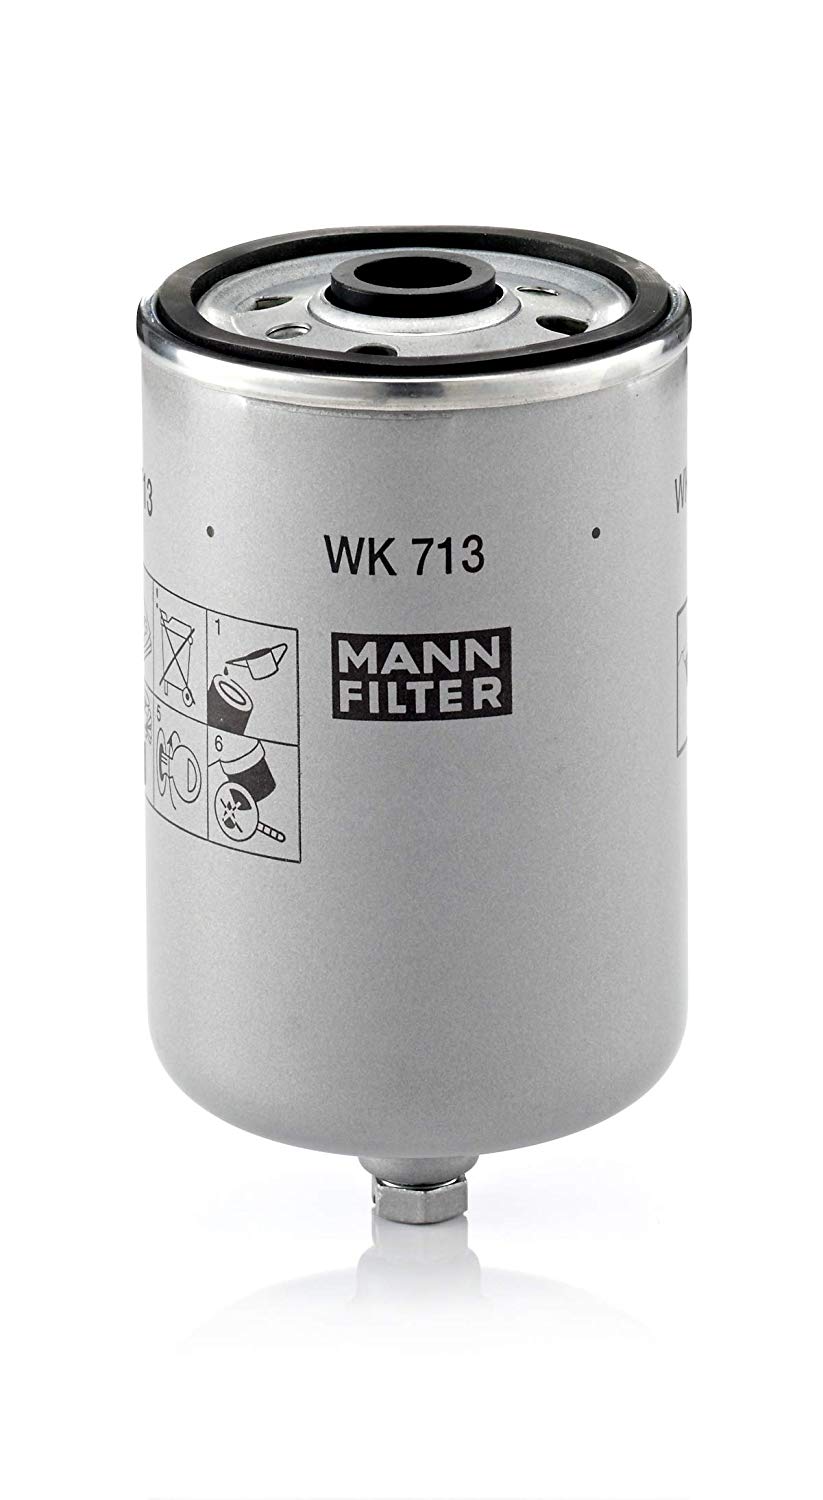 BORG & BECK FUEL FILTER FOR VOLVO XC90 DIESEL 2.4 120KW 